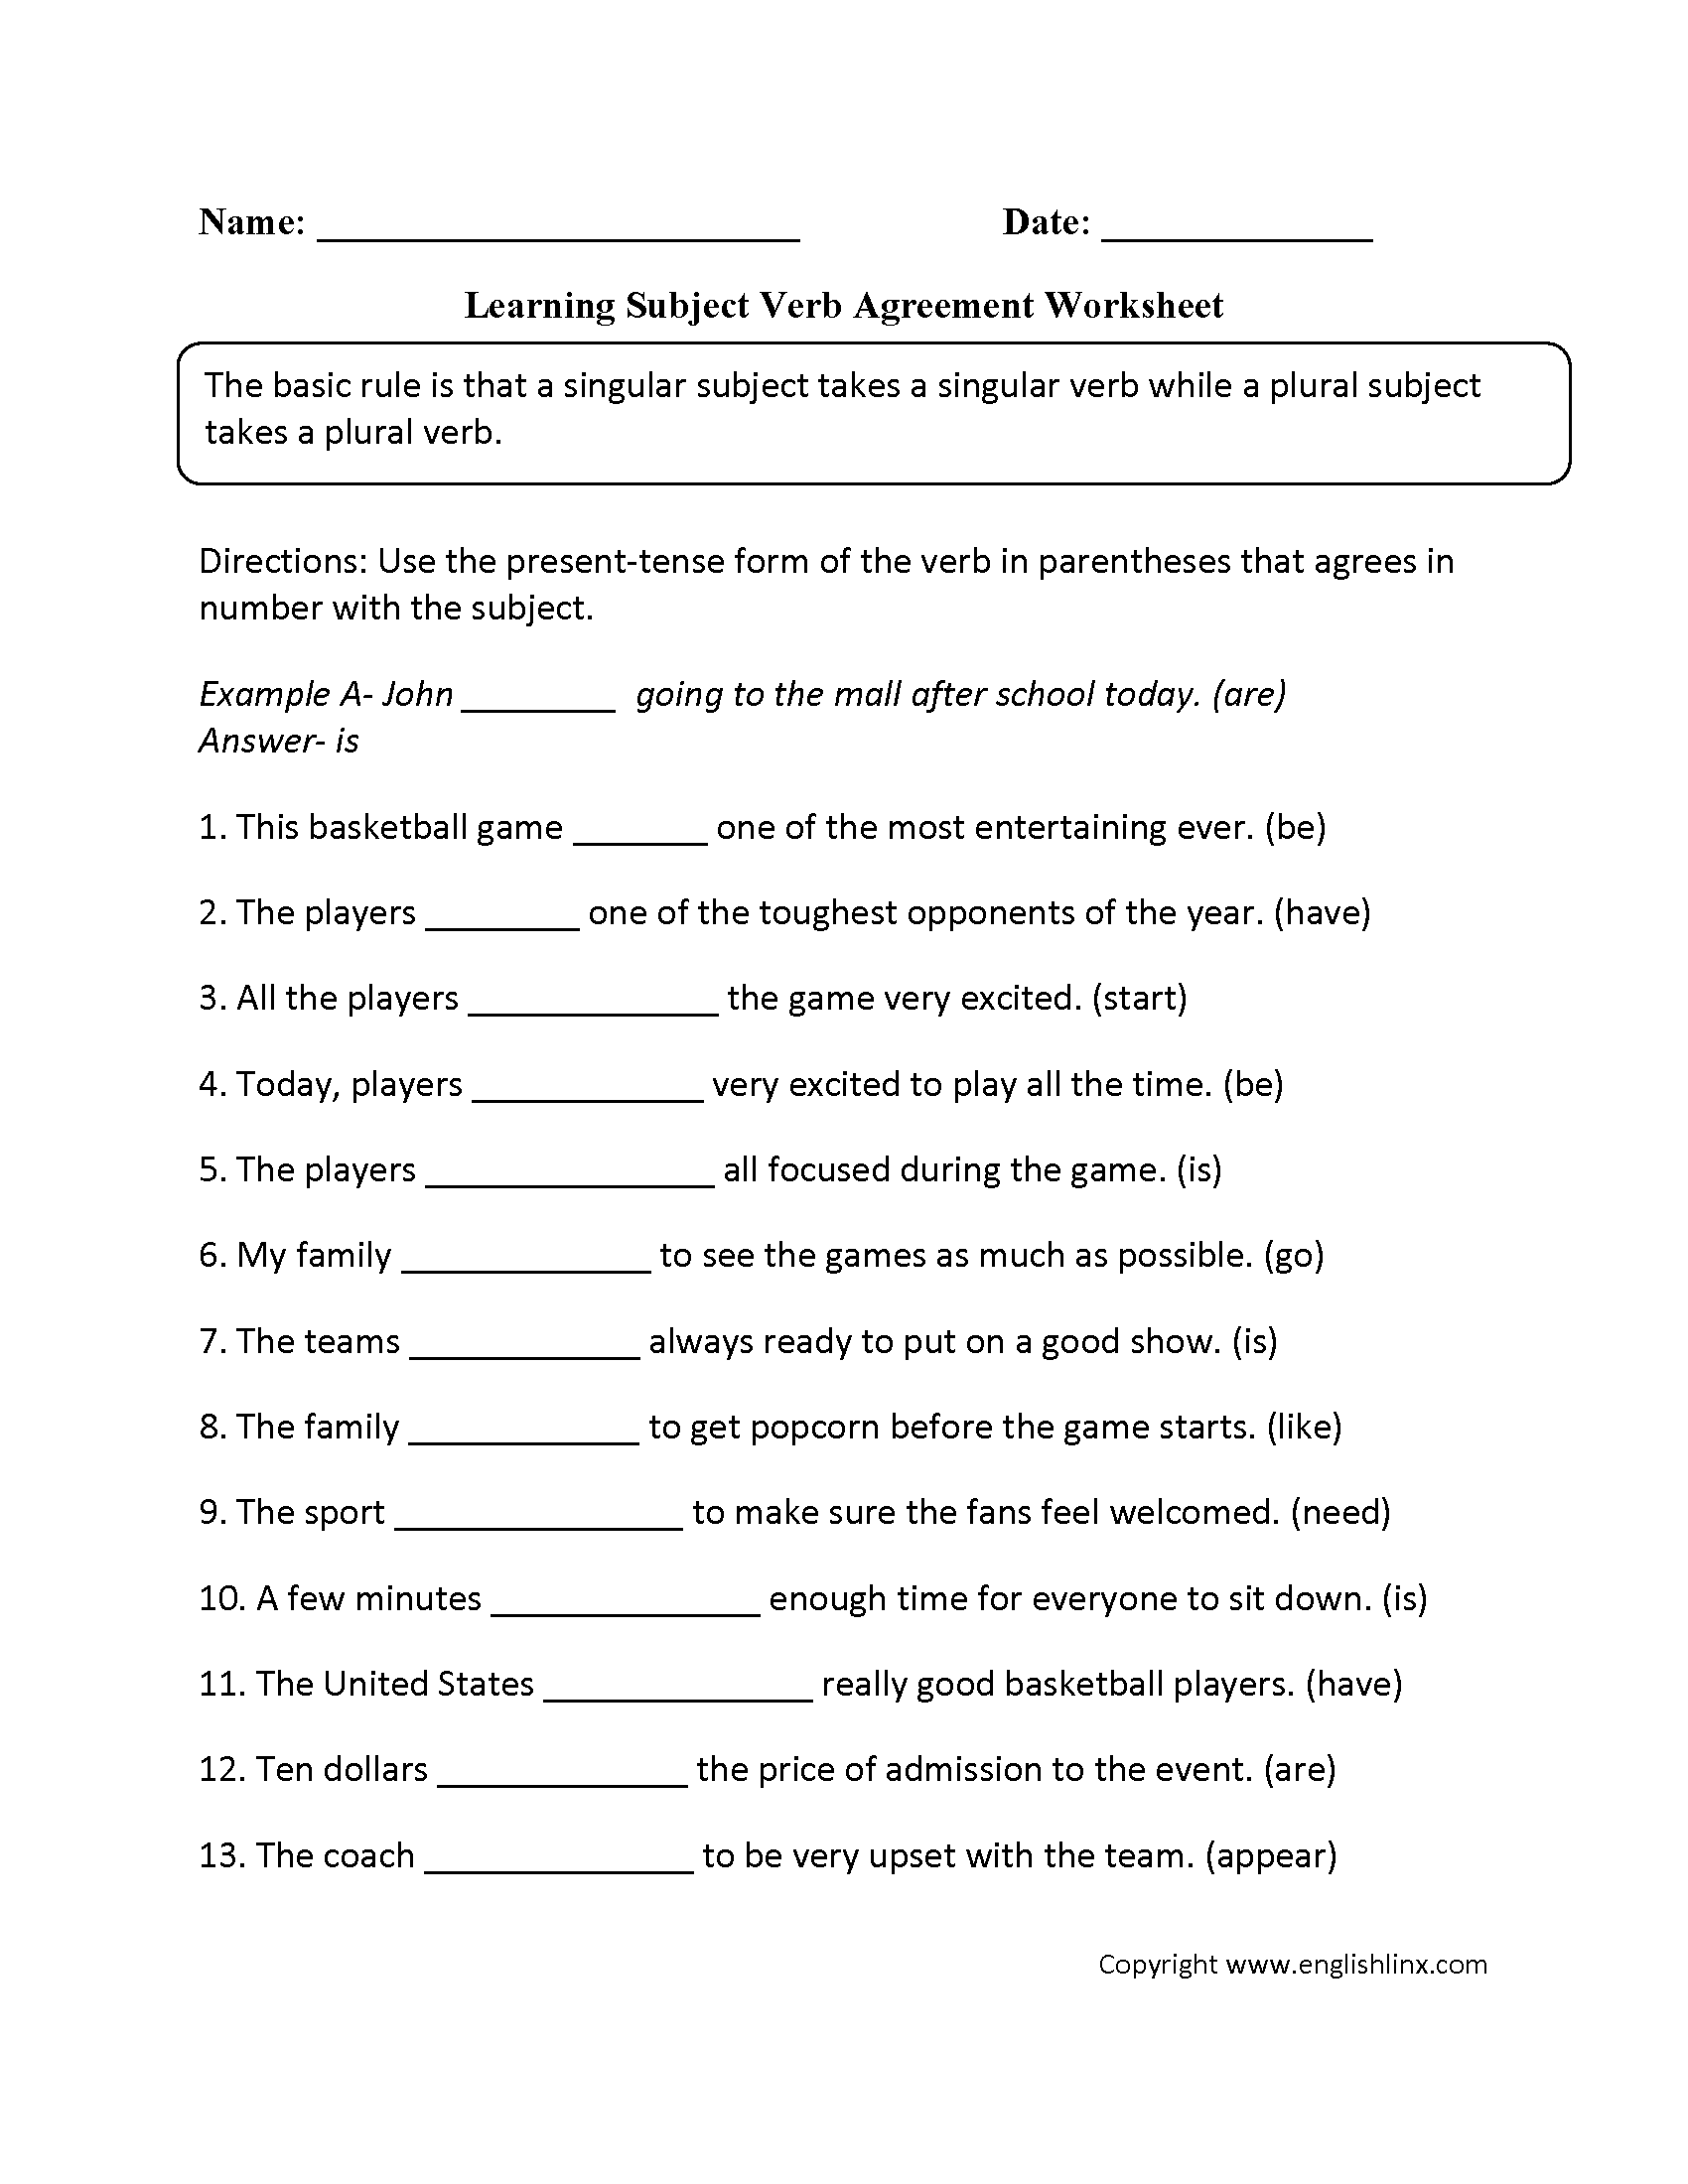 Learning Subject Verb Agreement Worksheet Verb 